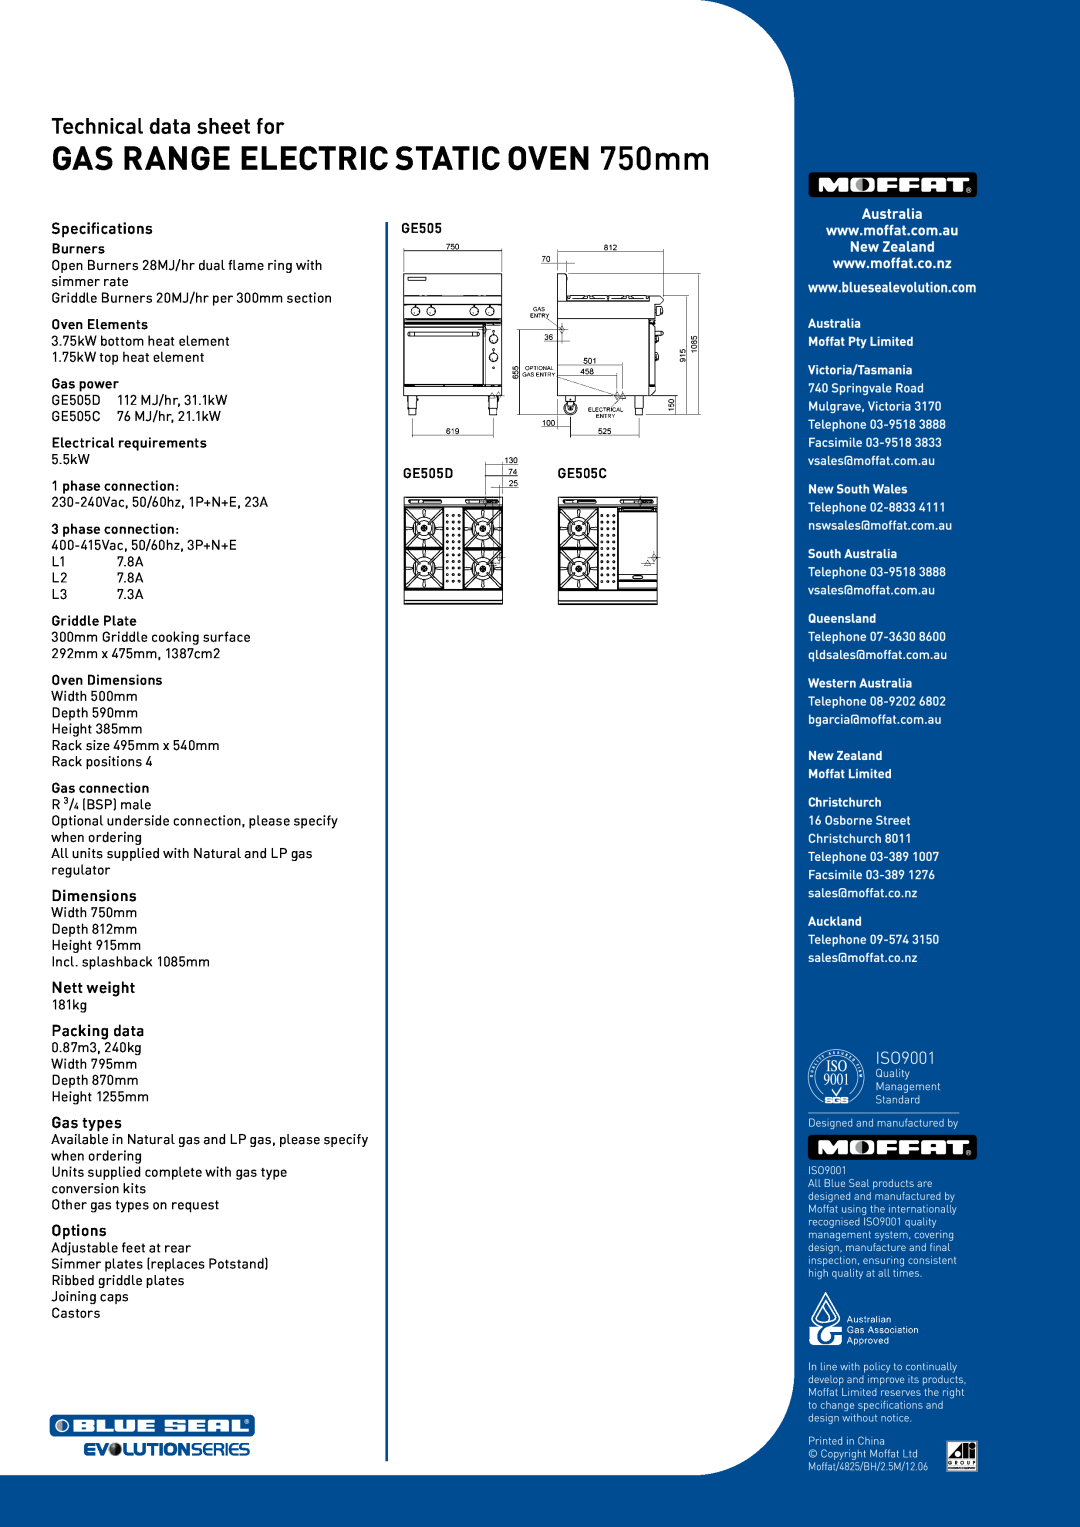 Moffat GE505C, GE505D Specifications, Dimensions, Nett weight, Packing data, Gas types, Options, Technical data sheet for 